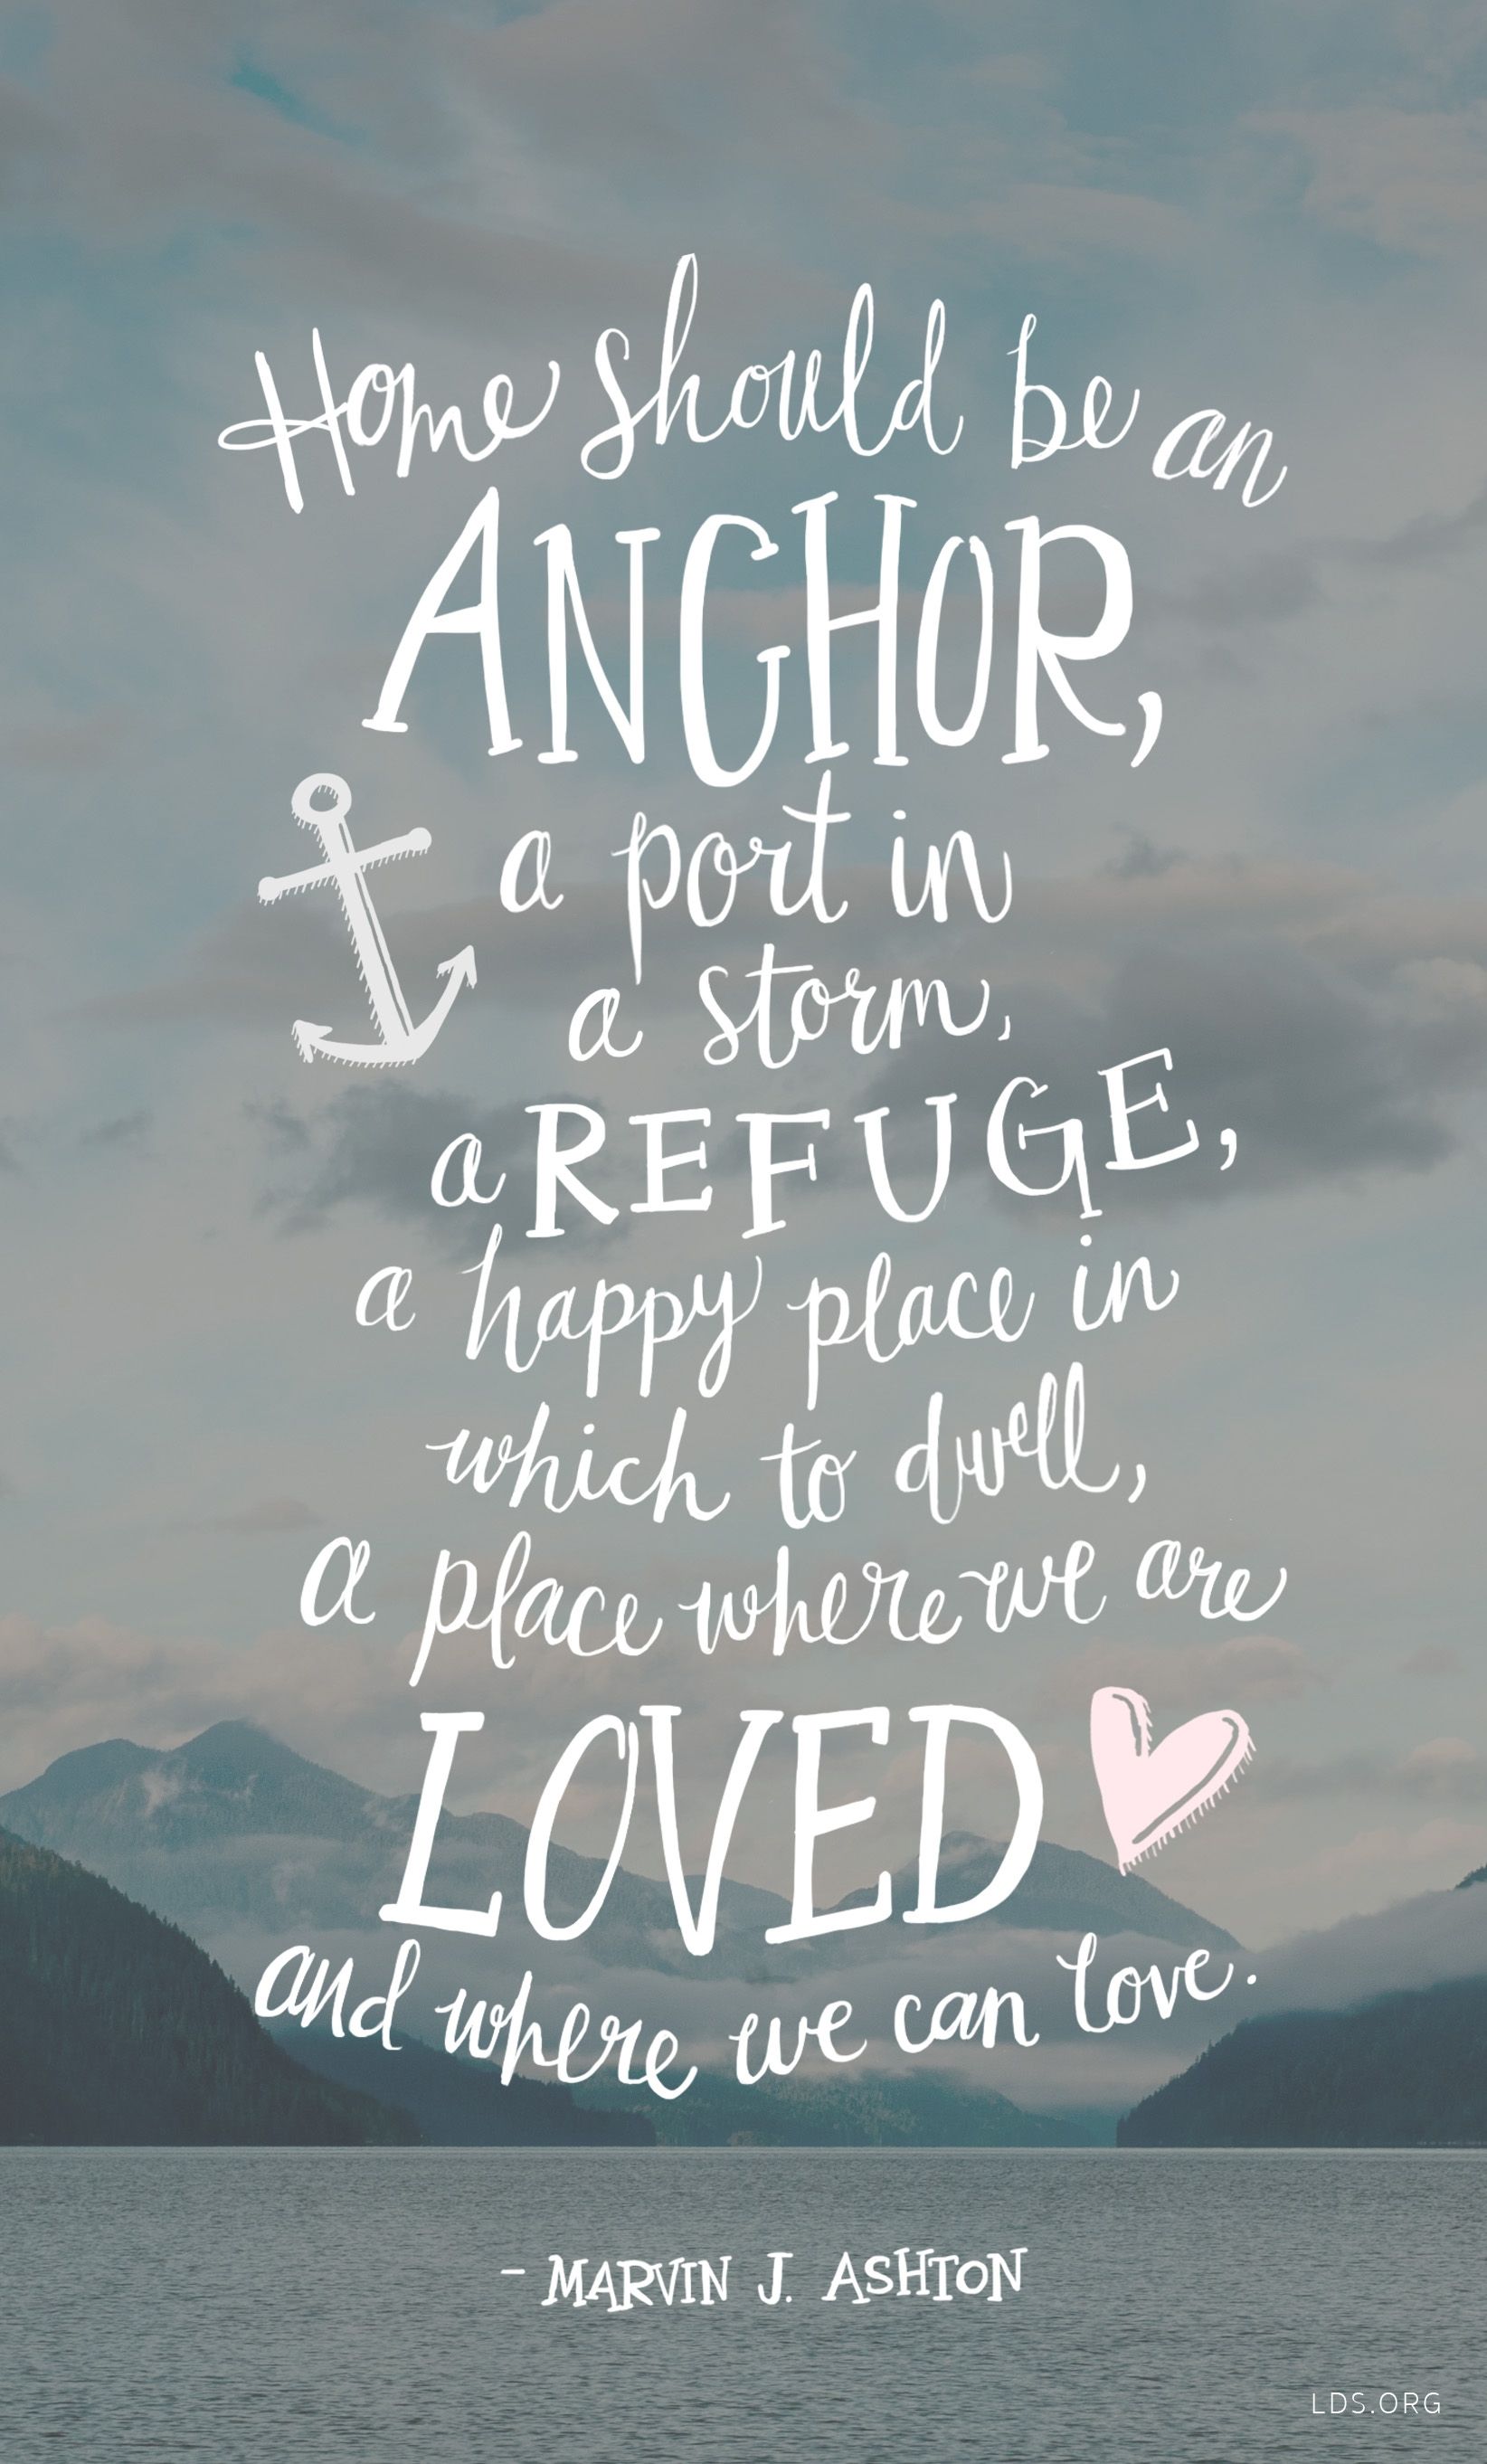 “Home should be an anchor, a port in a storm, a refuge, a happy place in which to dwell, a place where we are loved and where we can love.” —Elder Marvin J. Ashton, “A Yearning for Home”